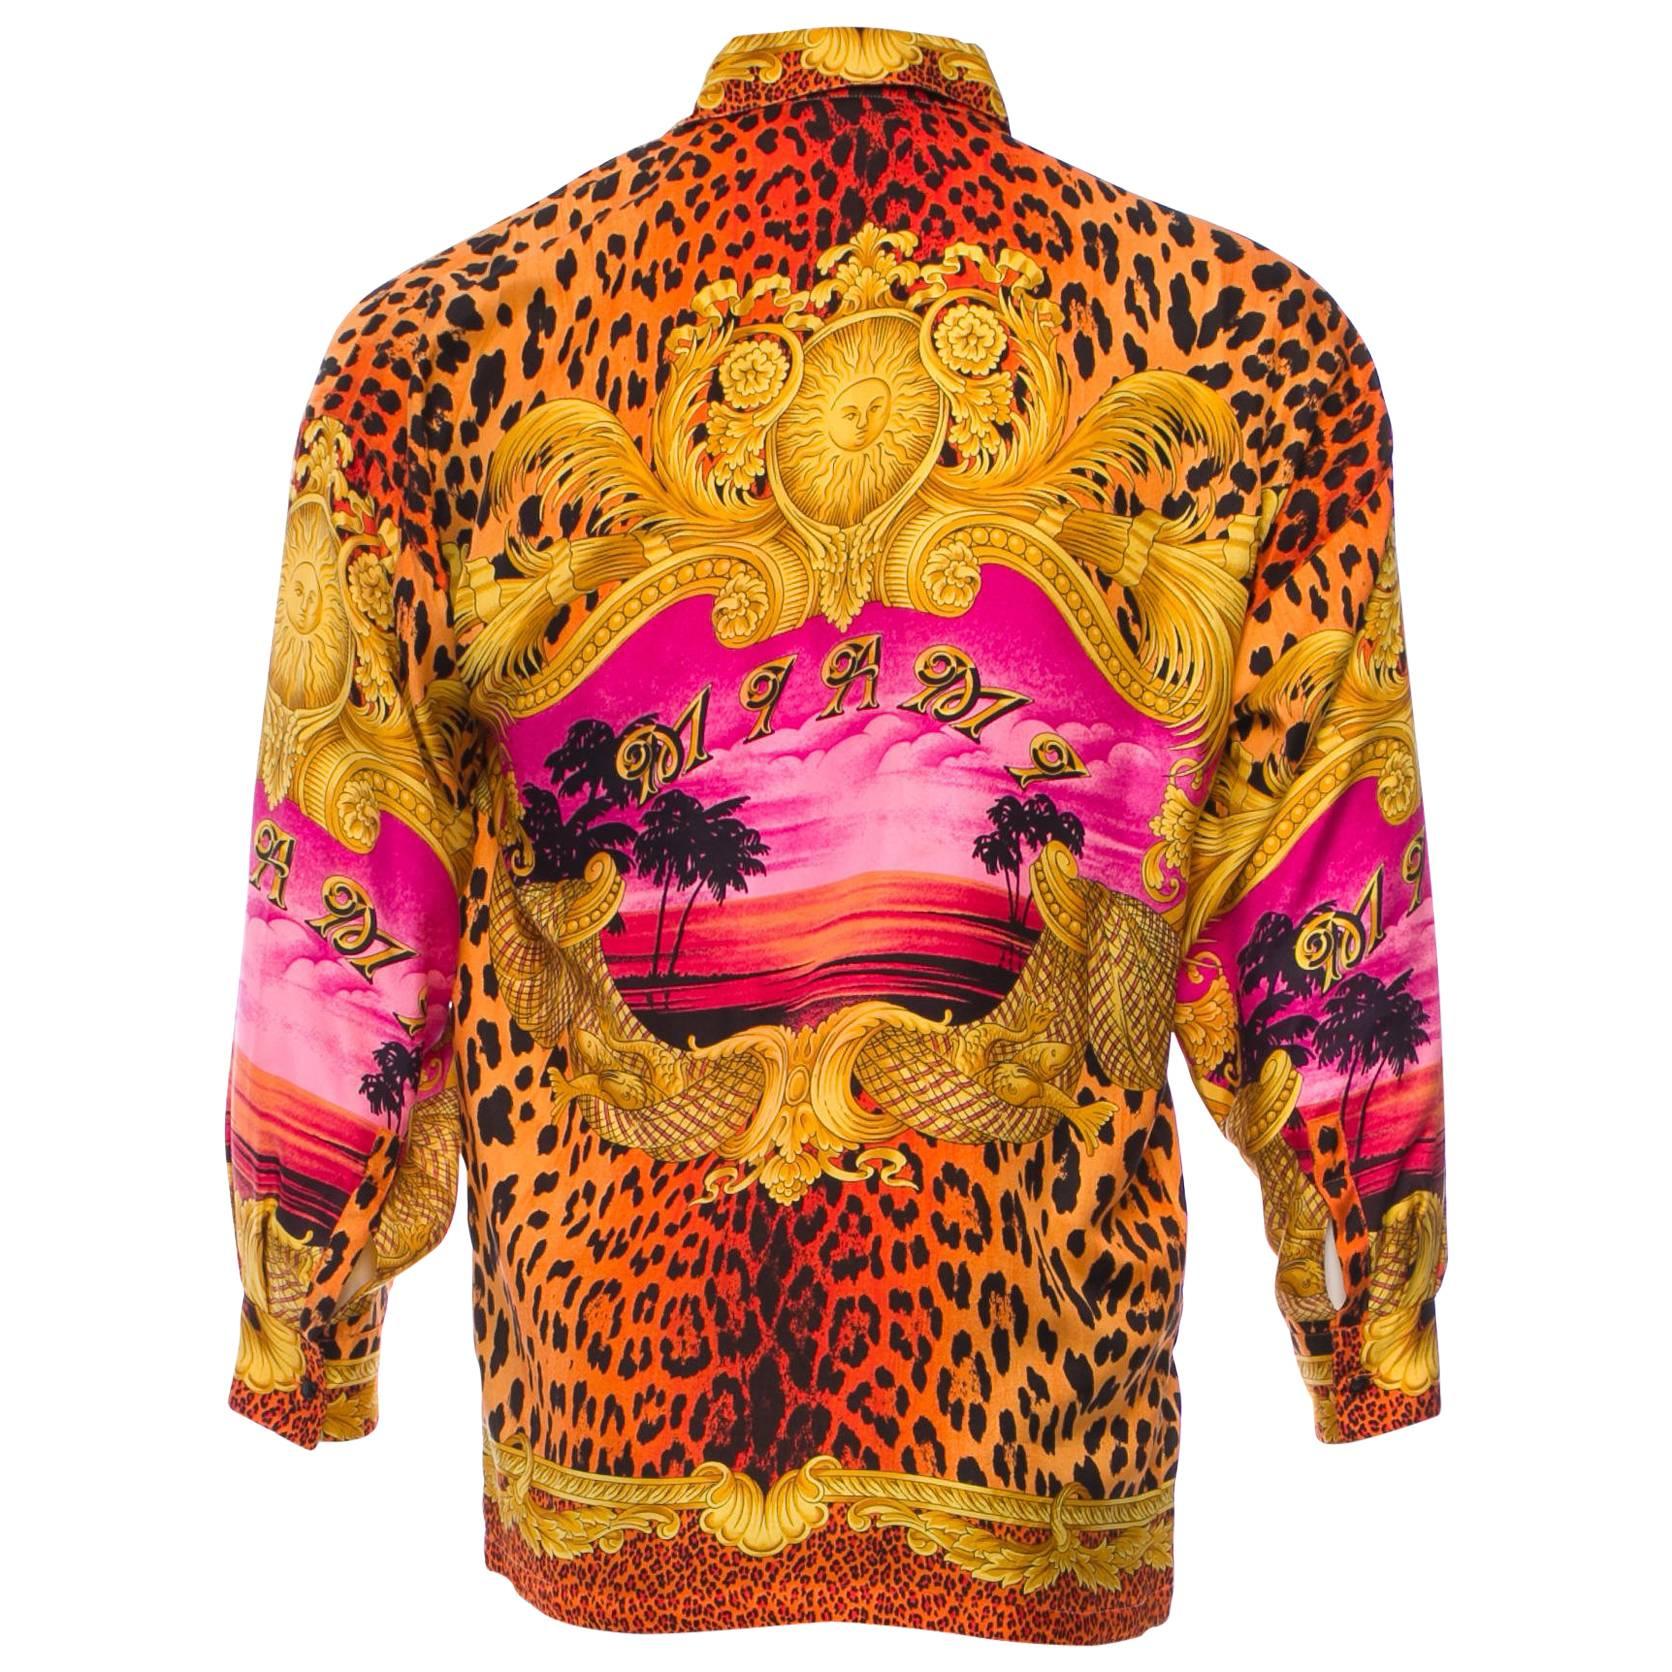 Gianni Versace Collectable 1993 Miami Silk Shirt with Leopard Print For Sale